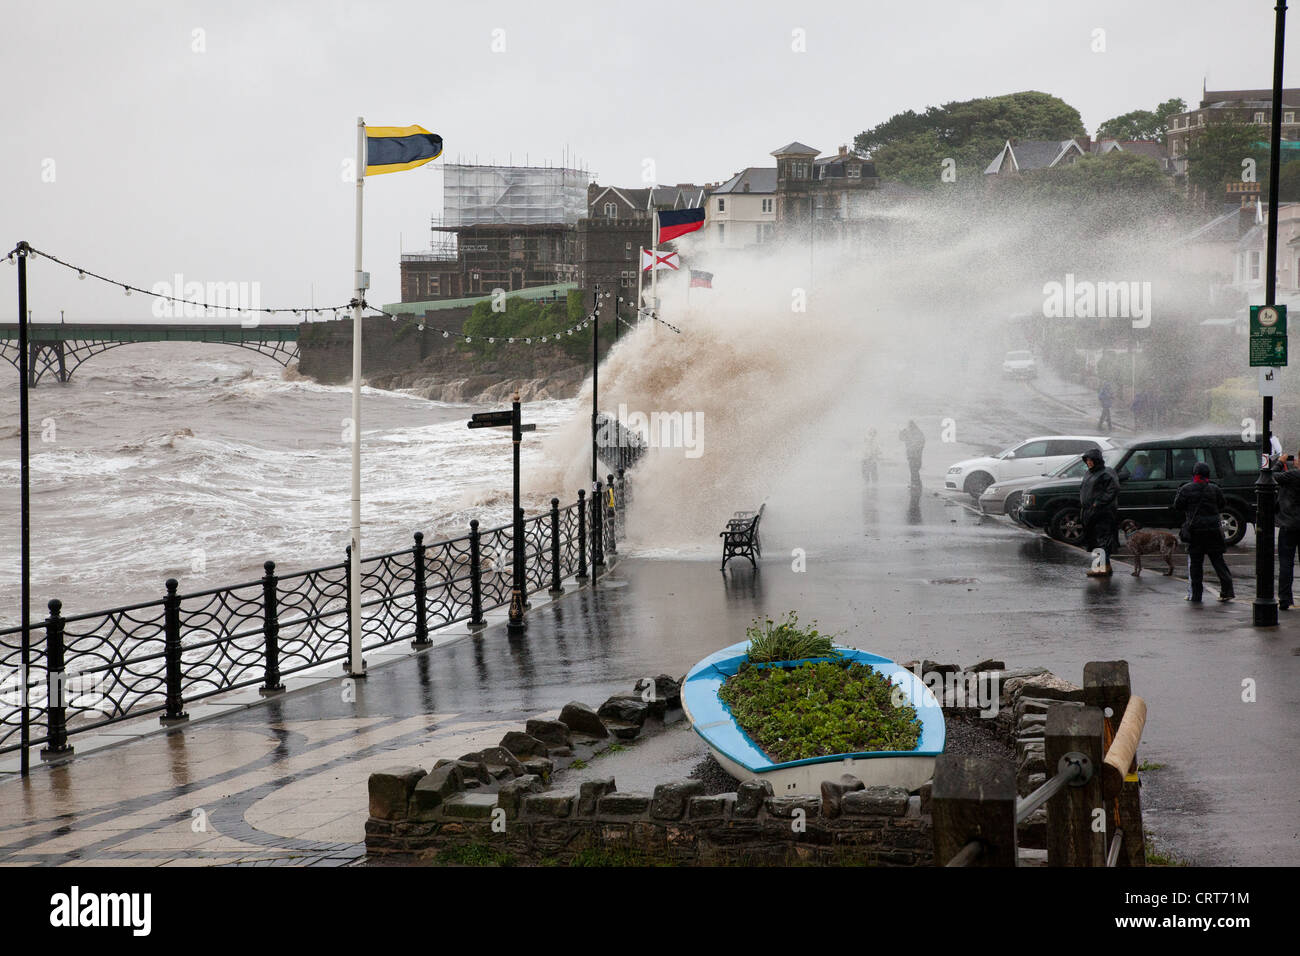 High seas at Clevedon, North Somerset, England Stock Photo